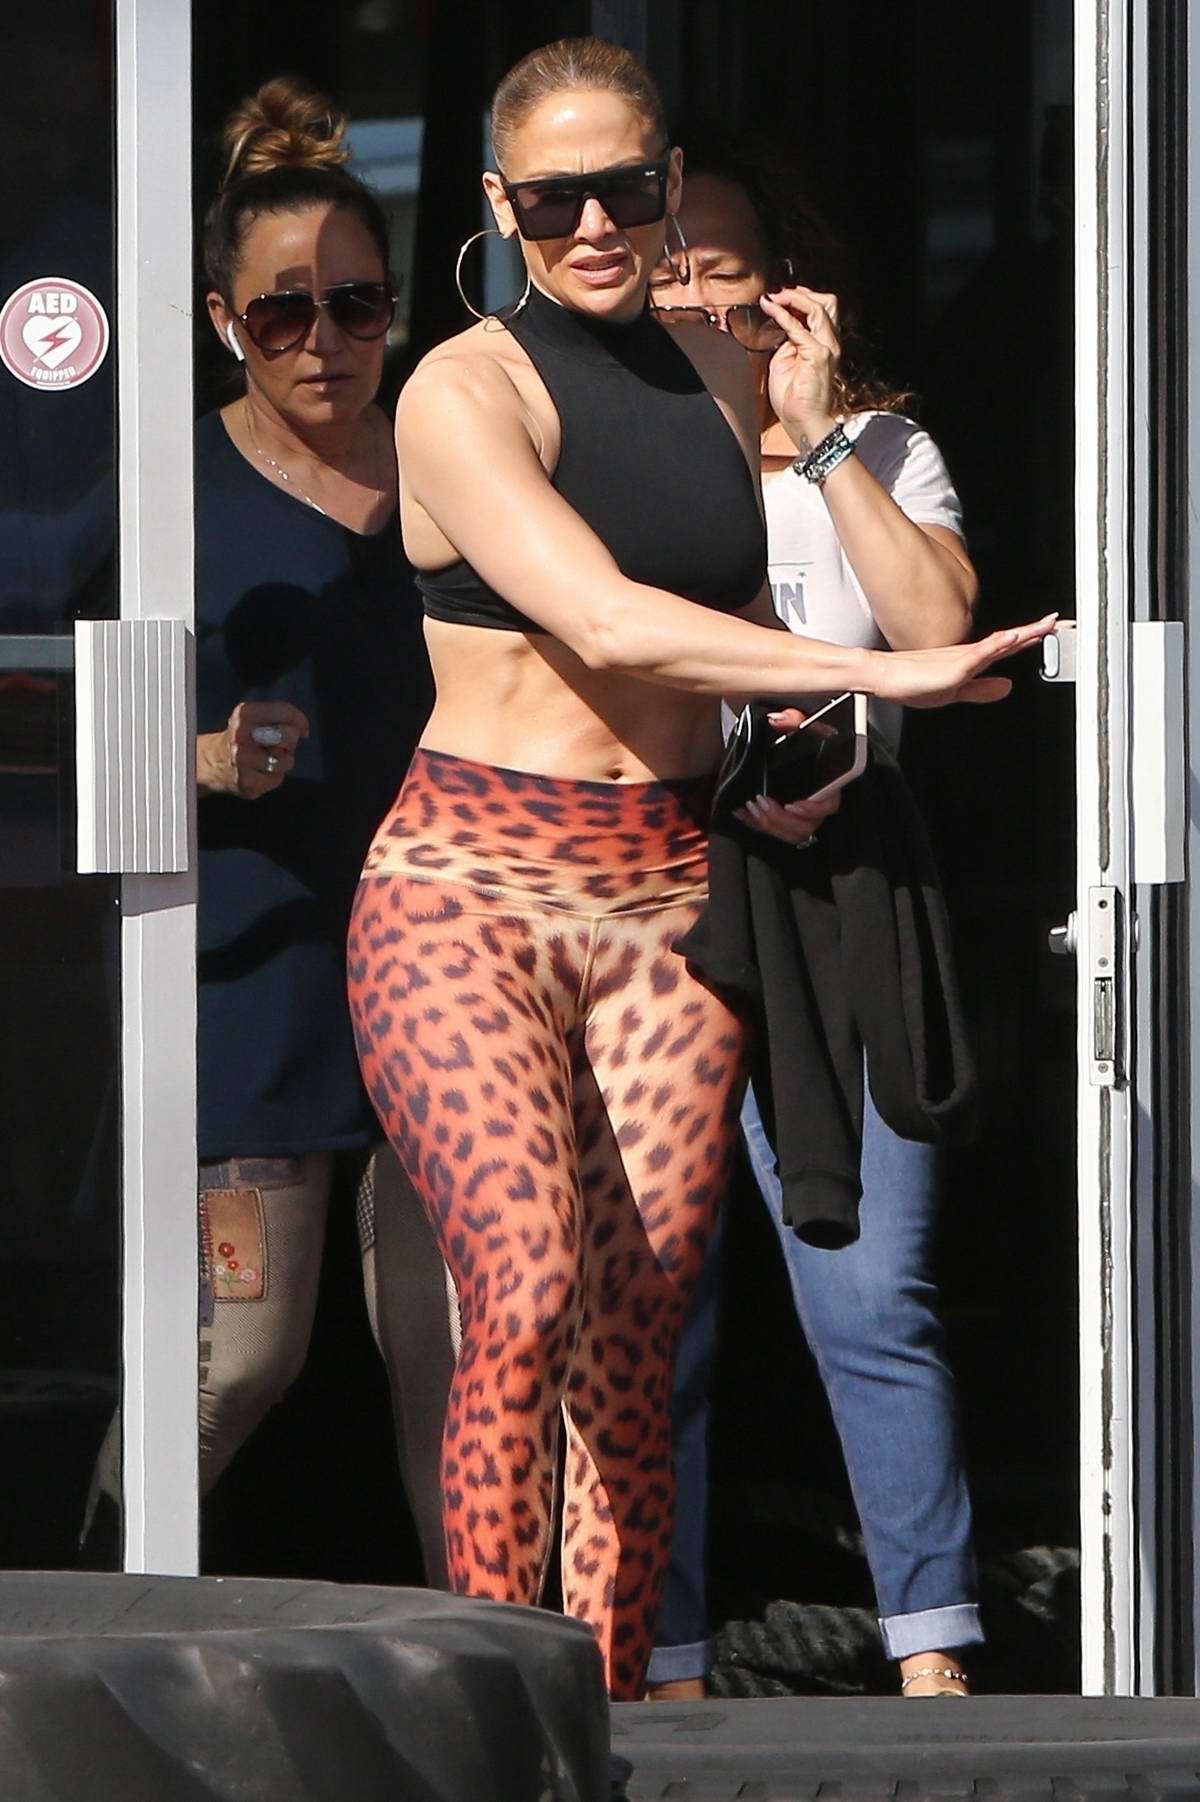 Rumer Willis flashes her abs in a crop top and leggings as she